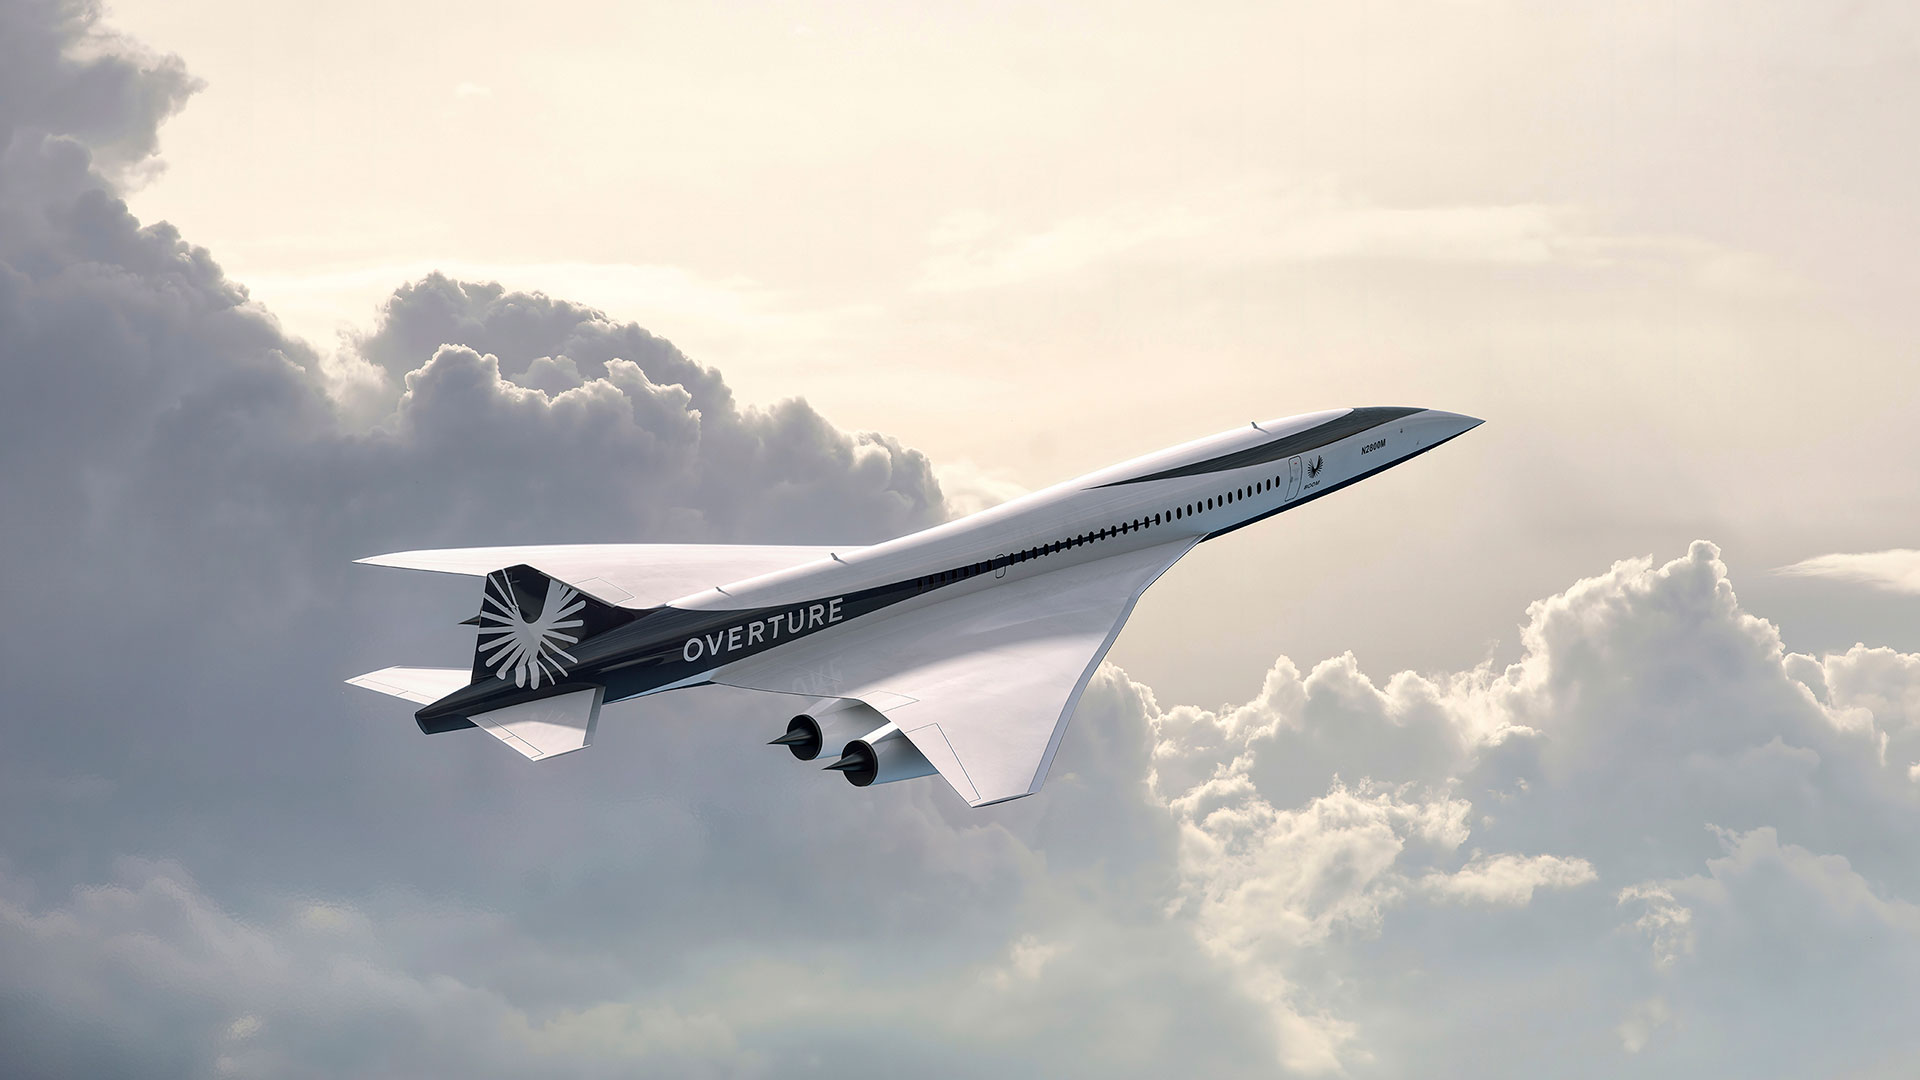 American Airlines reports that it has agreed to buy up to 20 supersonic aircraft still in the design phase that have separated us from flying for years (Boom Supersonic via AP)